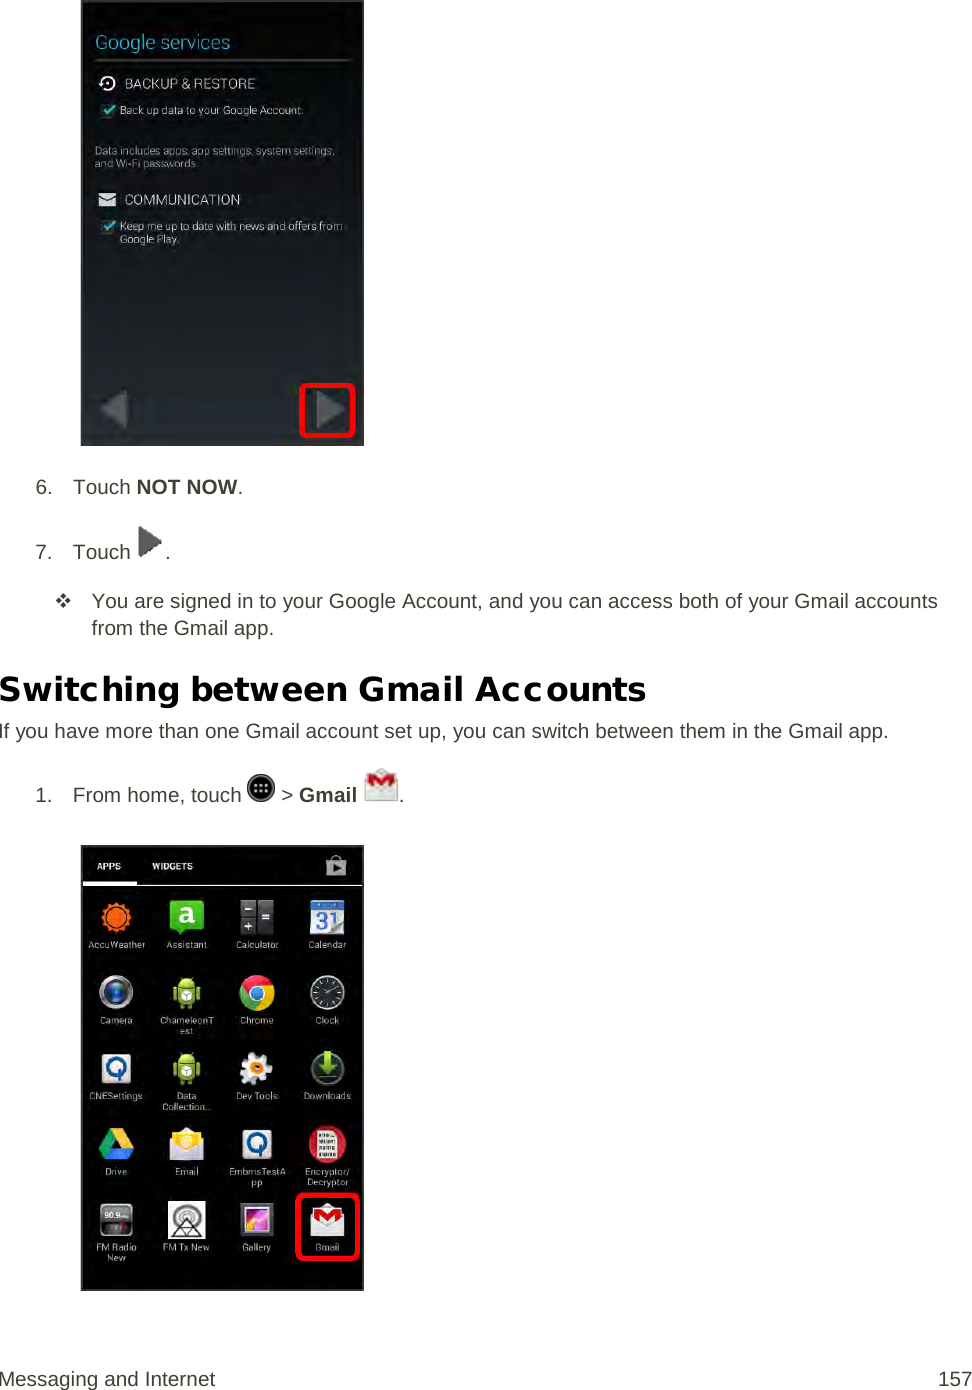   6. Touch NOT NOW. 7.  Touch  .  You are signed in to your Google Account, and you can access both of your Gmail accounts from the Gmail app. Switching between Gmail Accounts If you have more than one Gmail account set up, you can switch between them in the Gmail app. 1.  From home, touch   &gt; Gmail  .   Messaging and Internet 157 